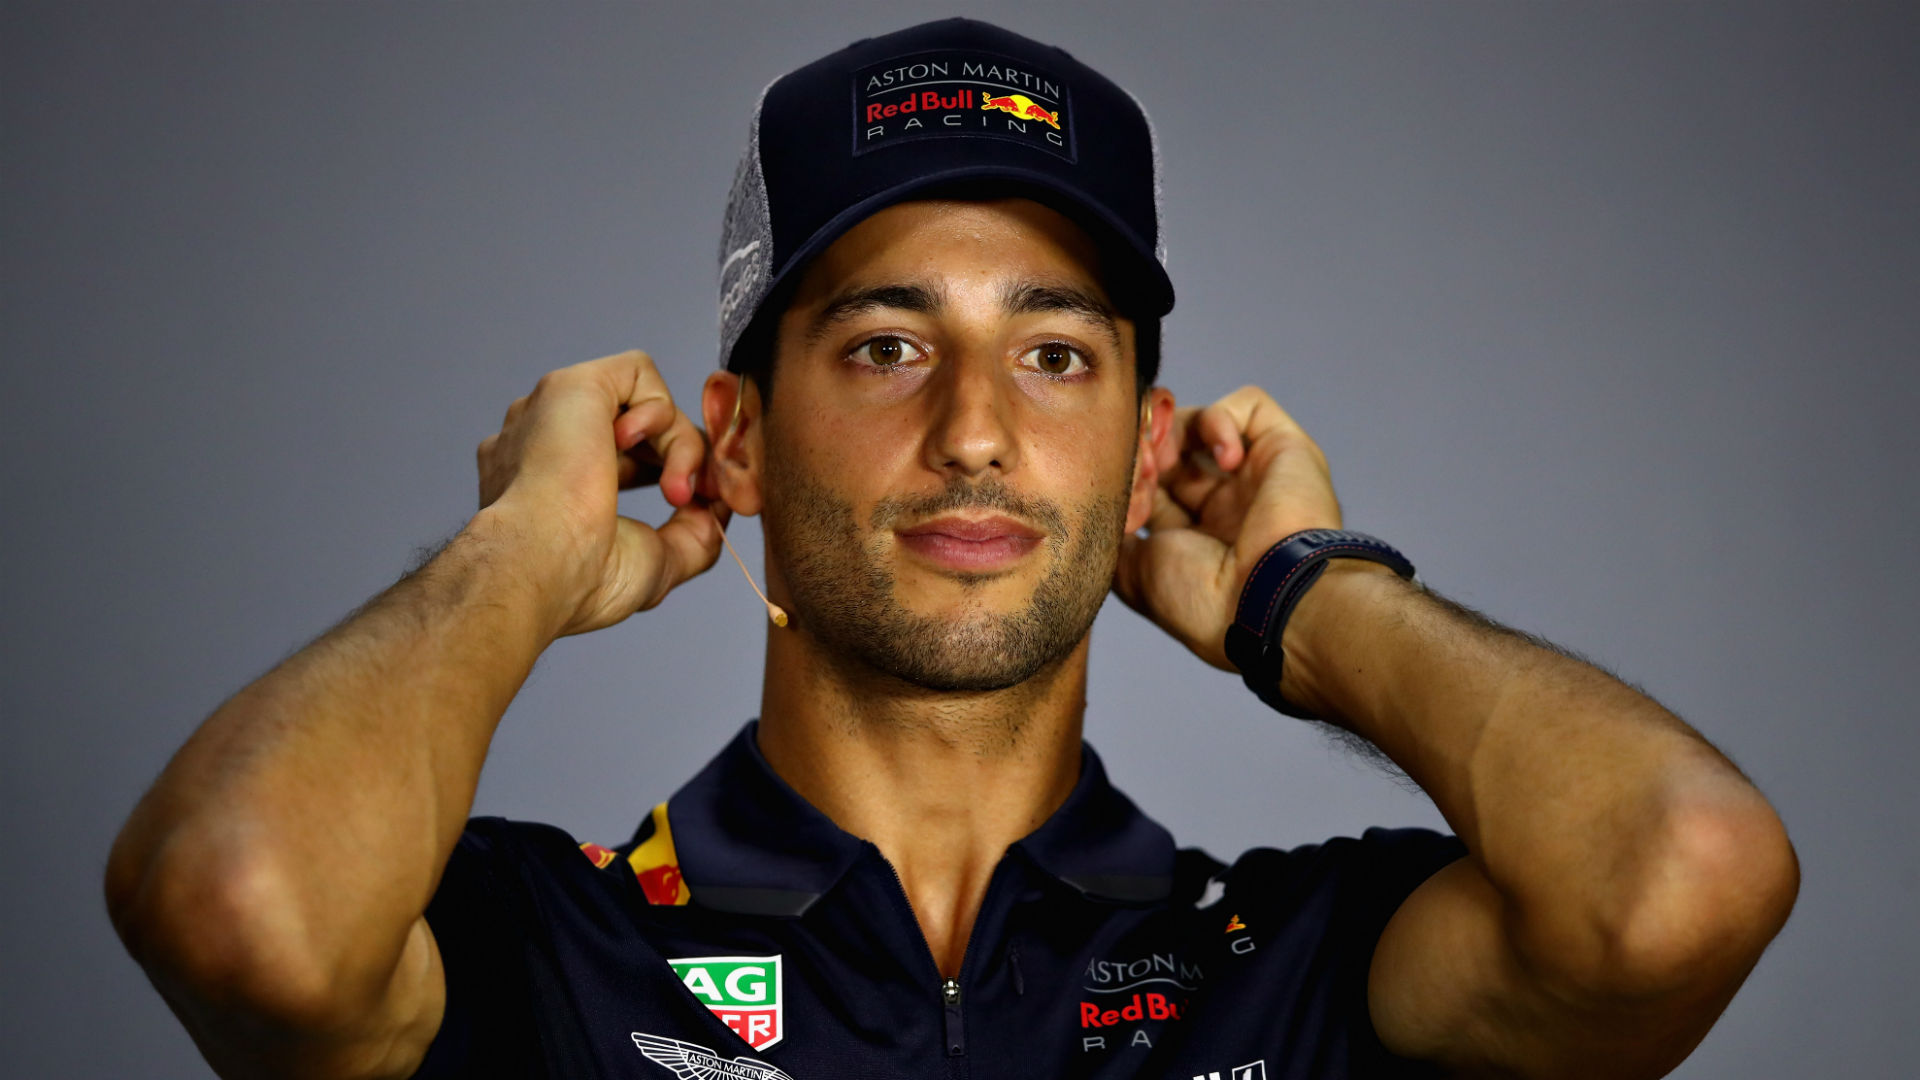 Ambitious Daniel Ricciardo can 'only gain' from next move | Sporting News